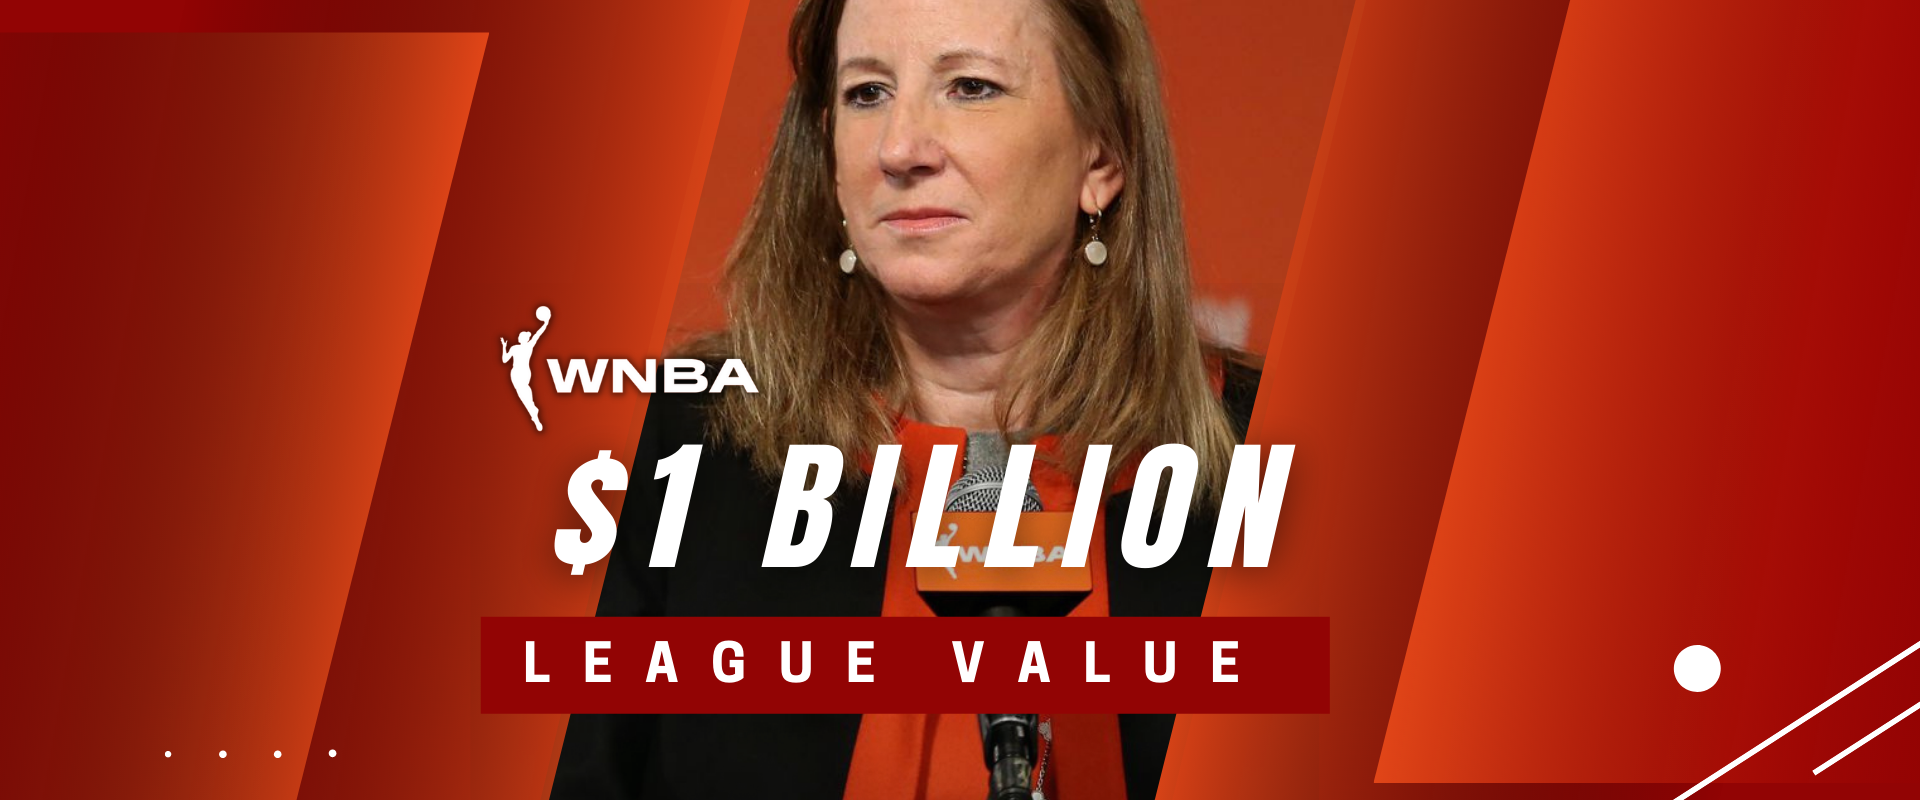 1920x1080_WNBA raises $75 million in capital to help growth, valuing the entire league at $1 billion-Ron